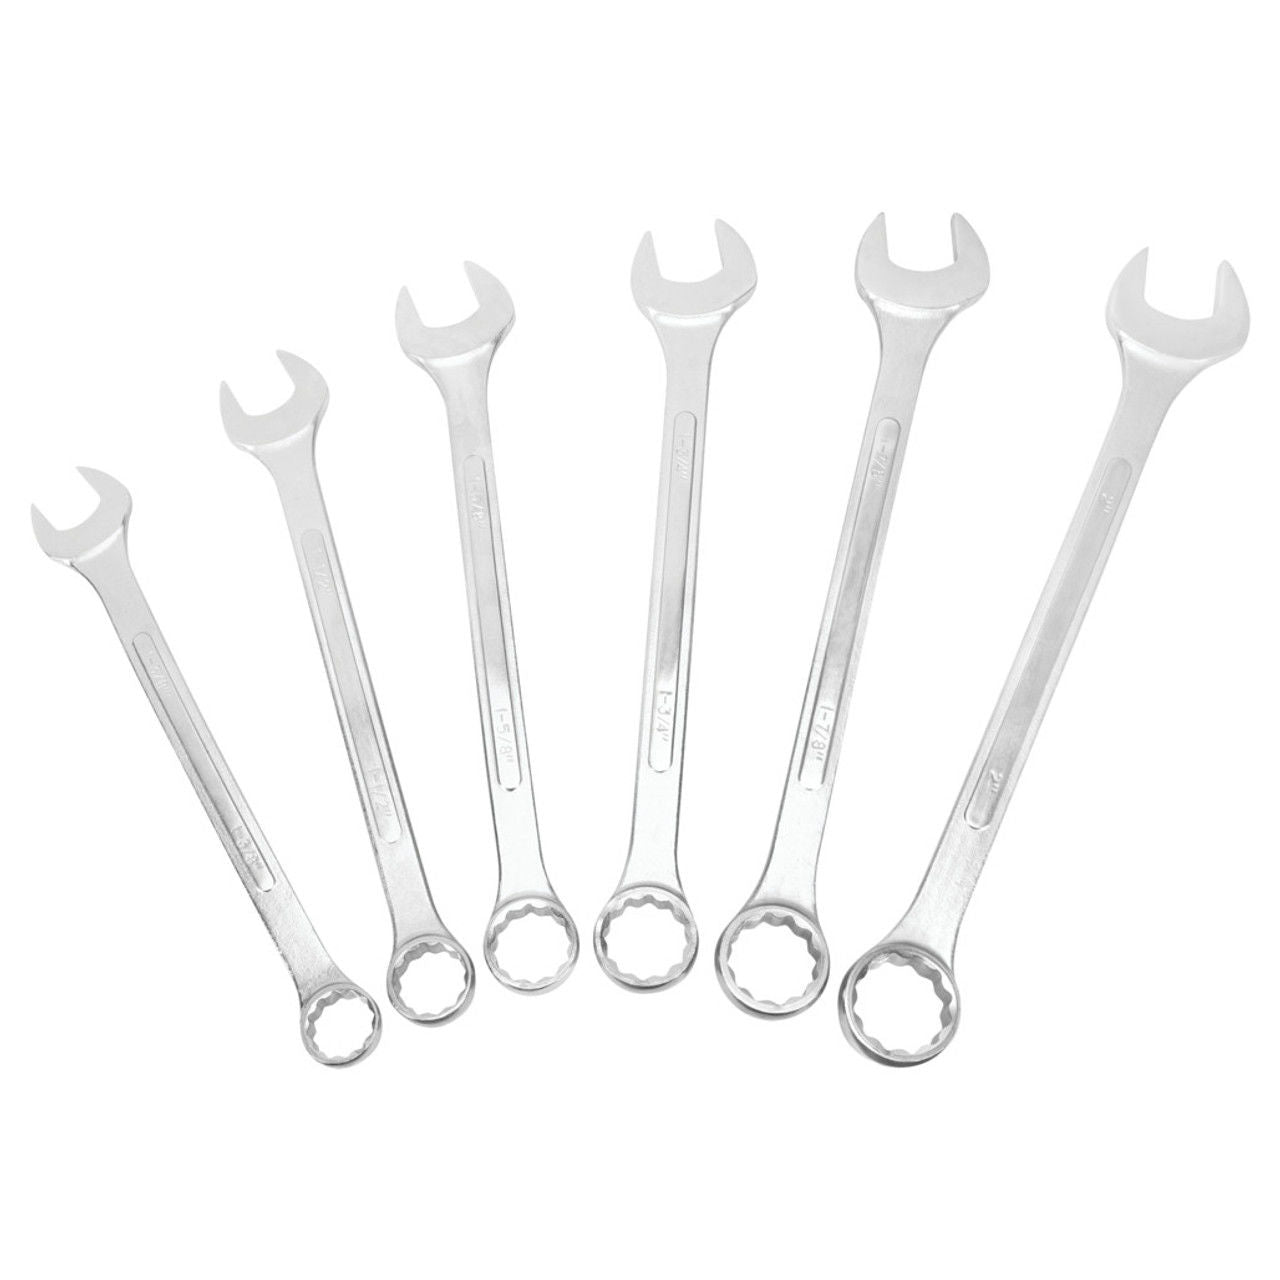 Performance Tools PTS-6 - Super Jumbo Combination Wrench Set 6 Pieces